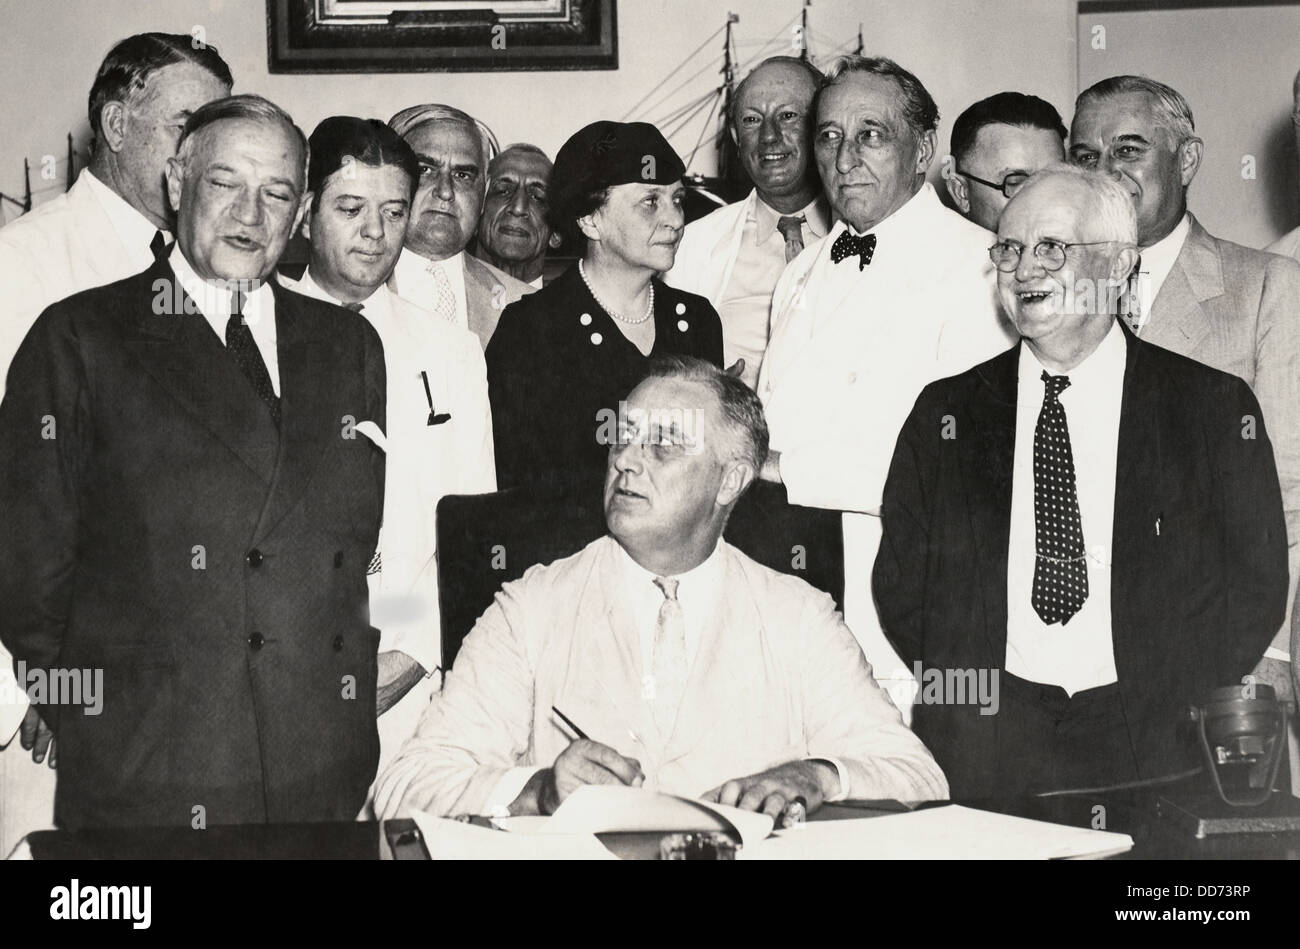 President Franklin Roosevelt signing the Social Security Act. Among those with the President are Sen. Alben Barkley, Sen. Stock Photo